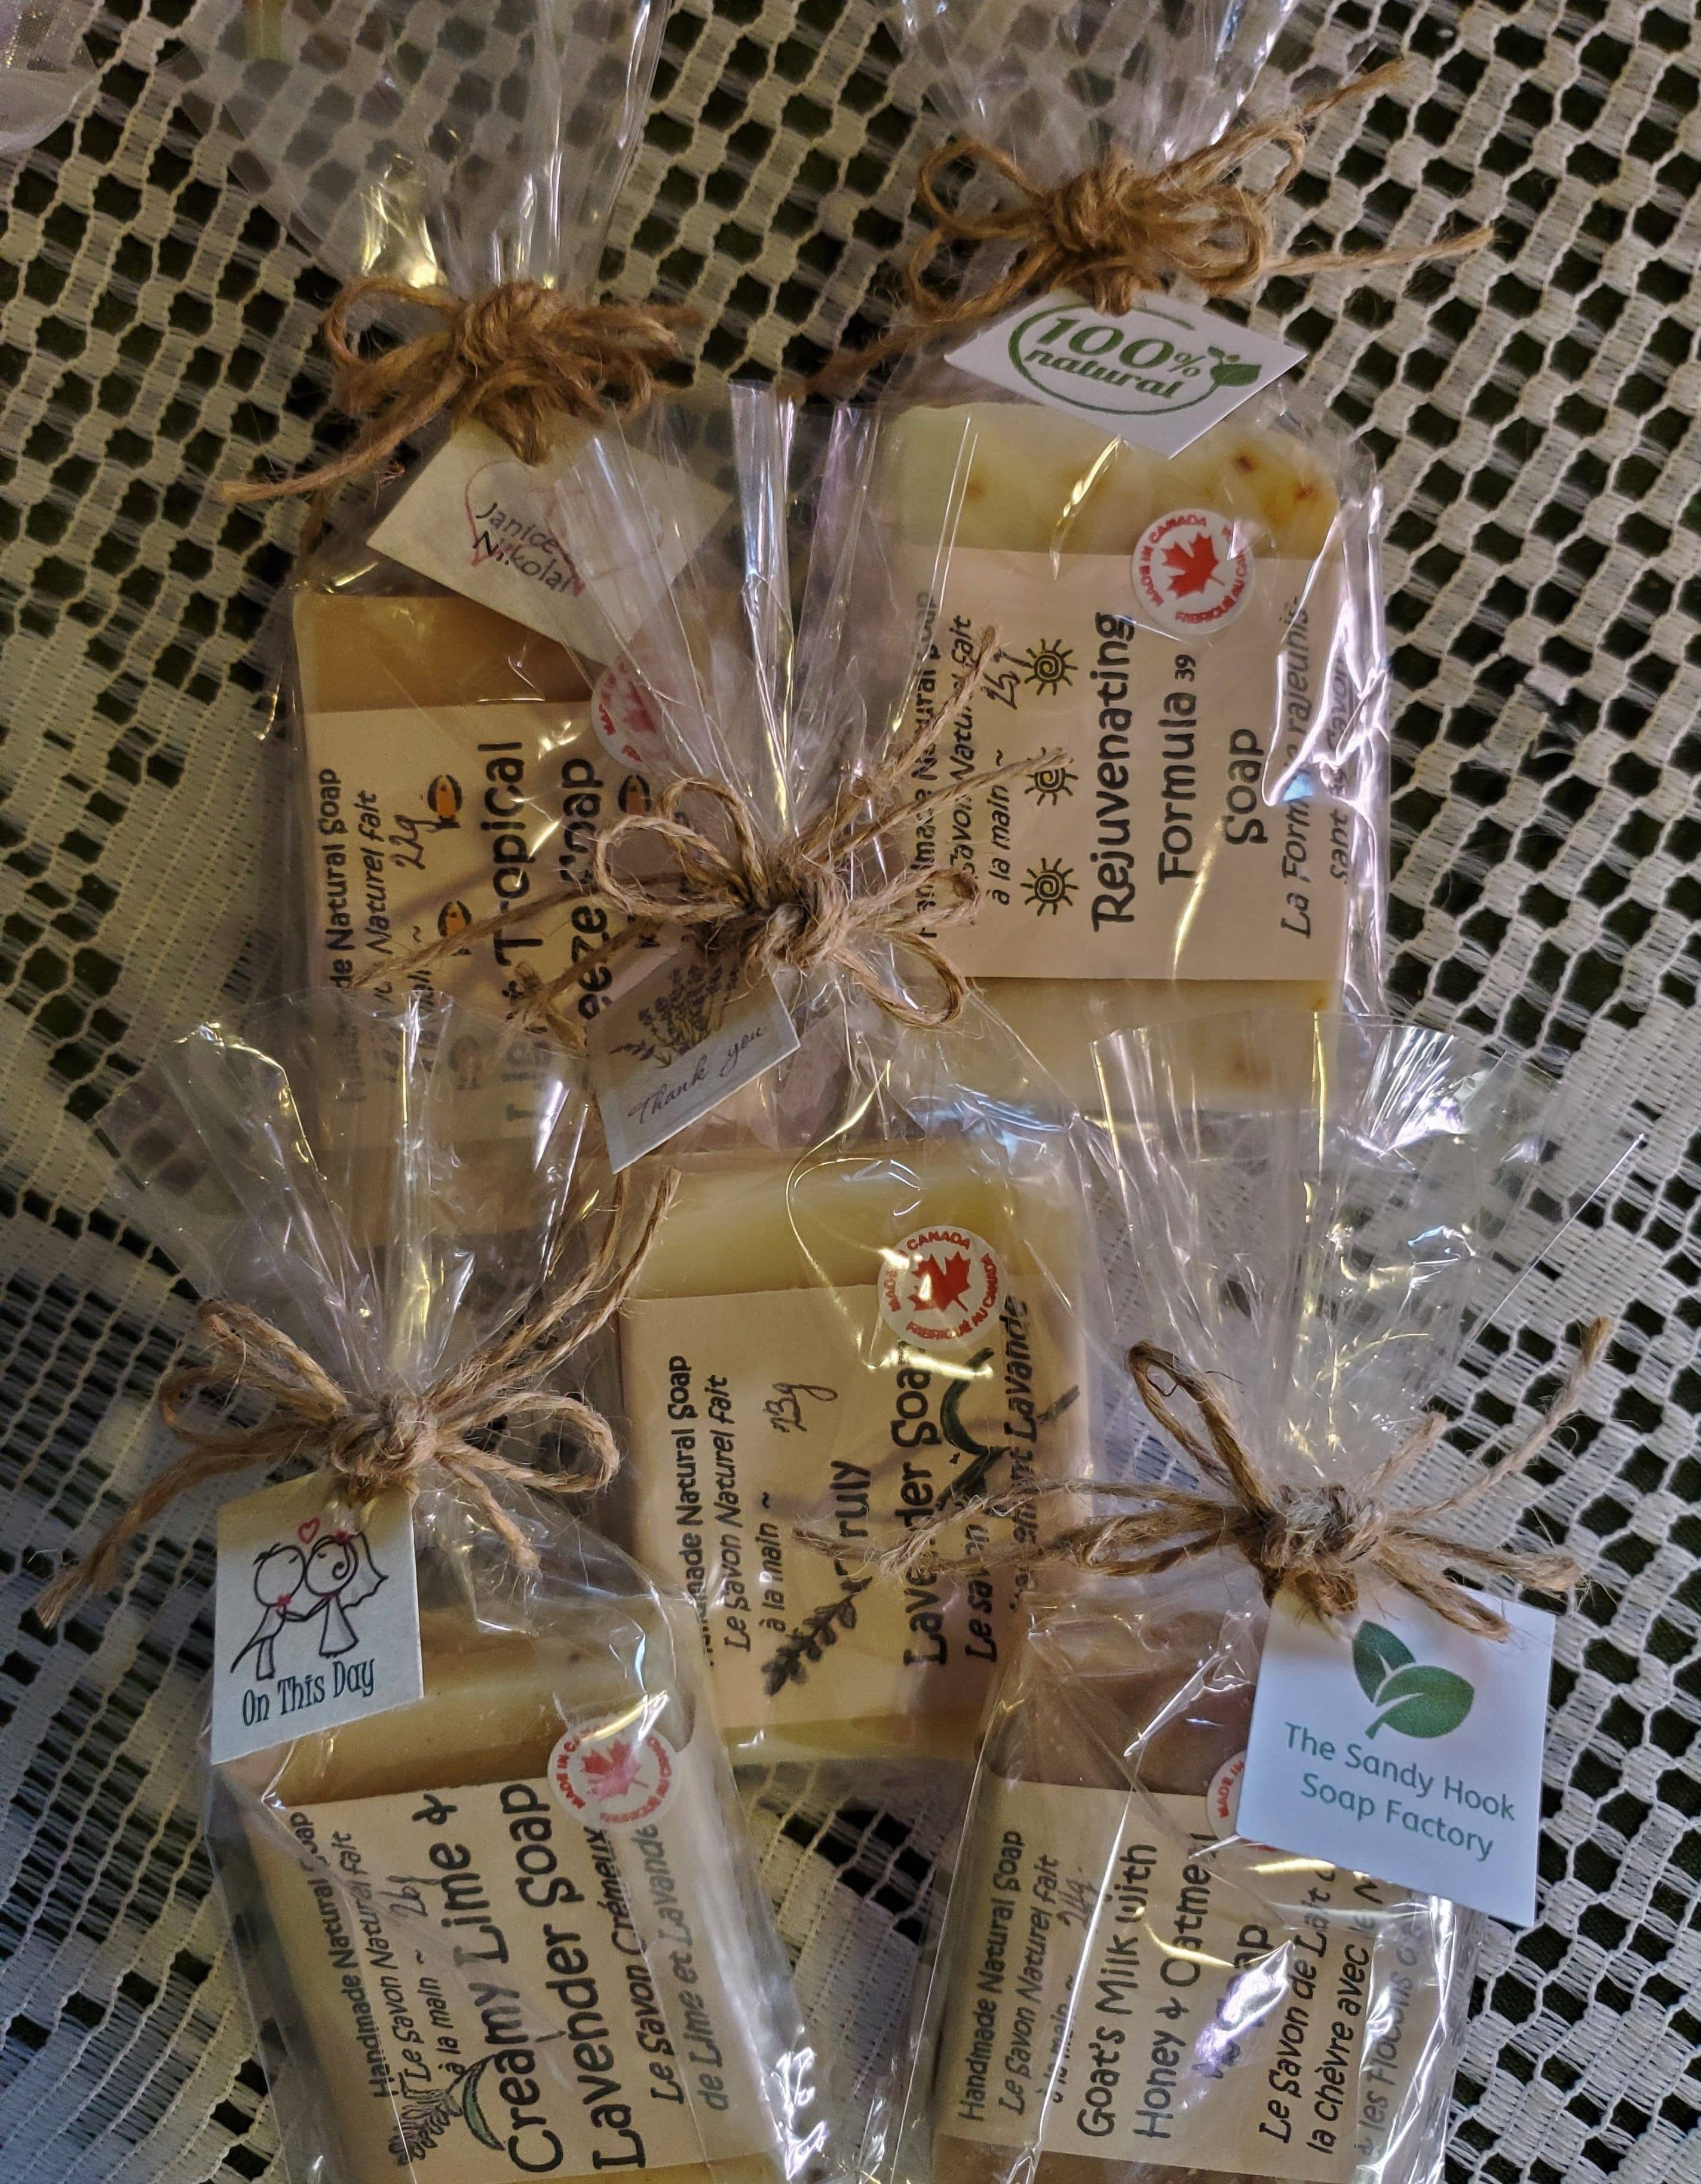 Our premium soap favours are customized to your Wedding Day, Bridal Shower or any special event where a quality guest gift is required. Made by hand in Manitoba